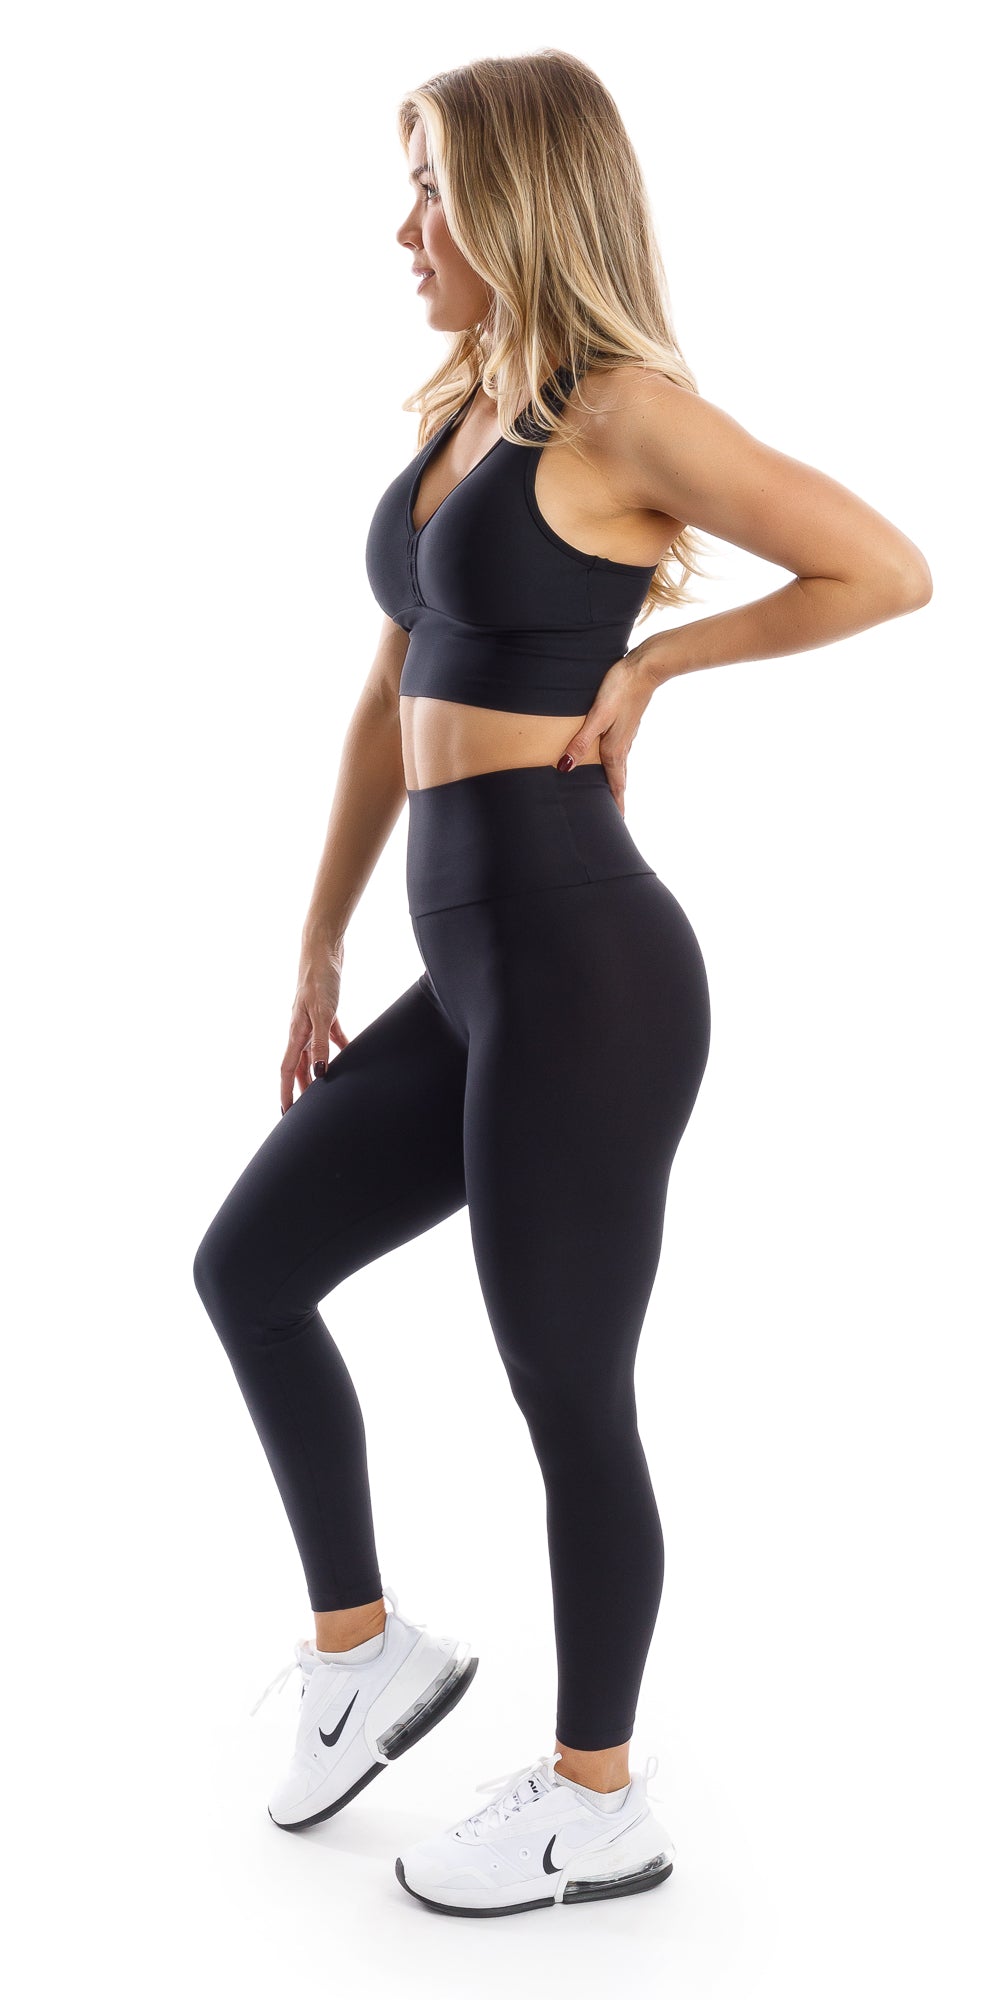 Full body side view of girl wearing black Midnight Eco Ultra High Waist Leggings and matching bra lifting right heel and putting left hand on waist